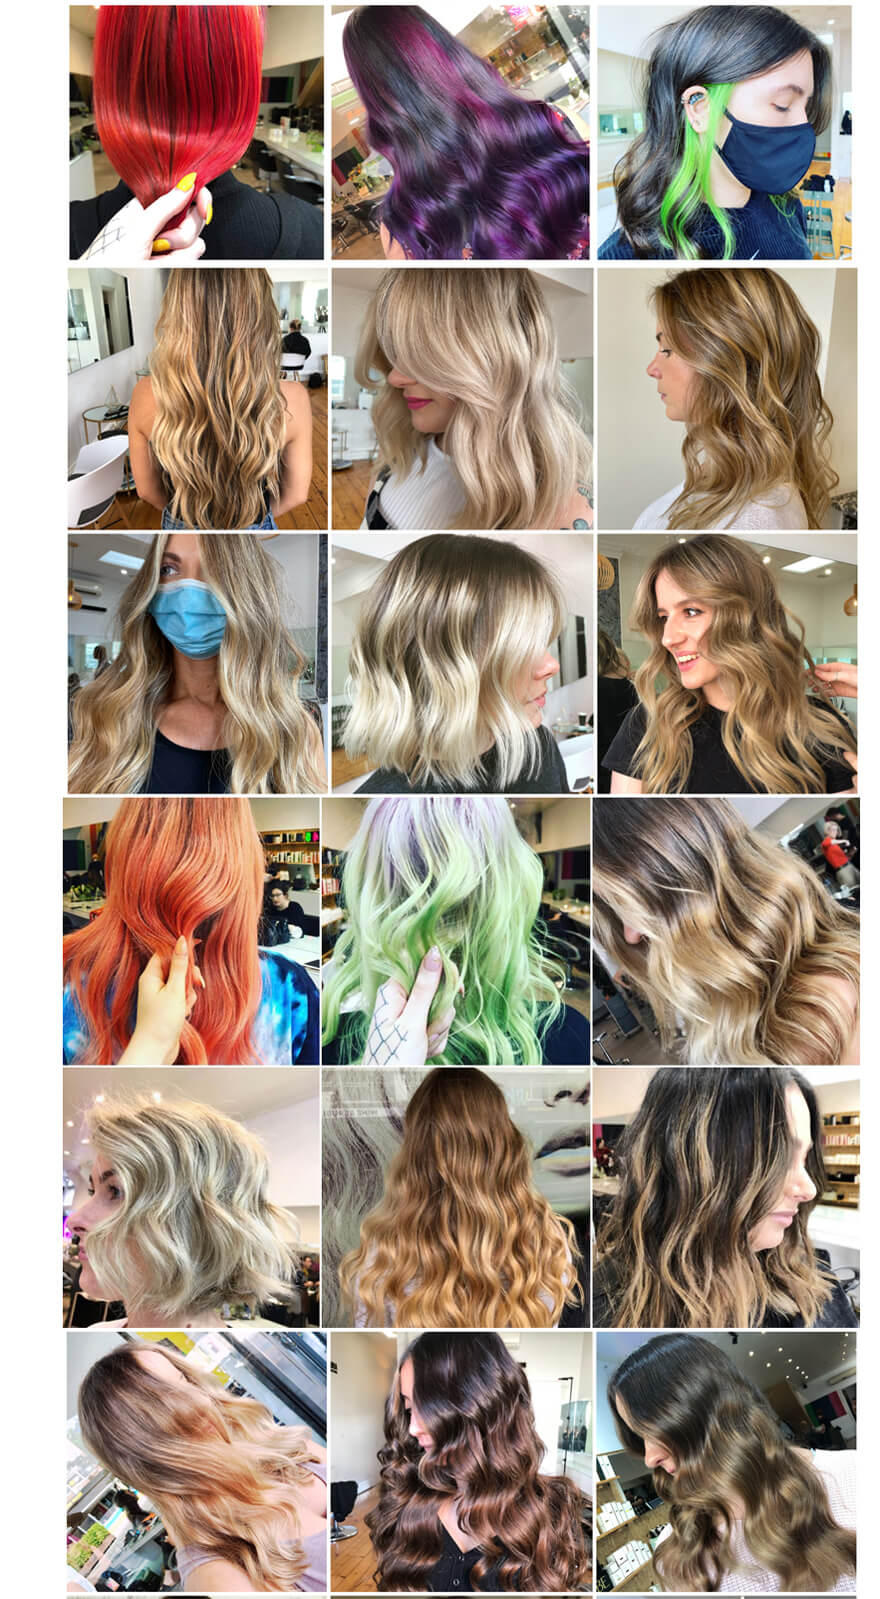 MELBOURNE'S BEST HAIR COLOUR SALON | FOR HUMANS WITH COLOURFUL STYLE